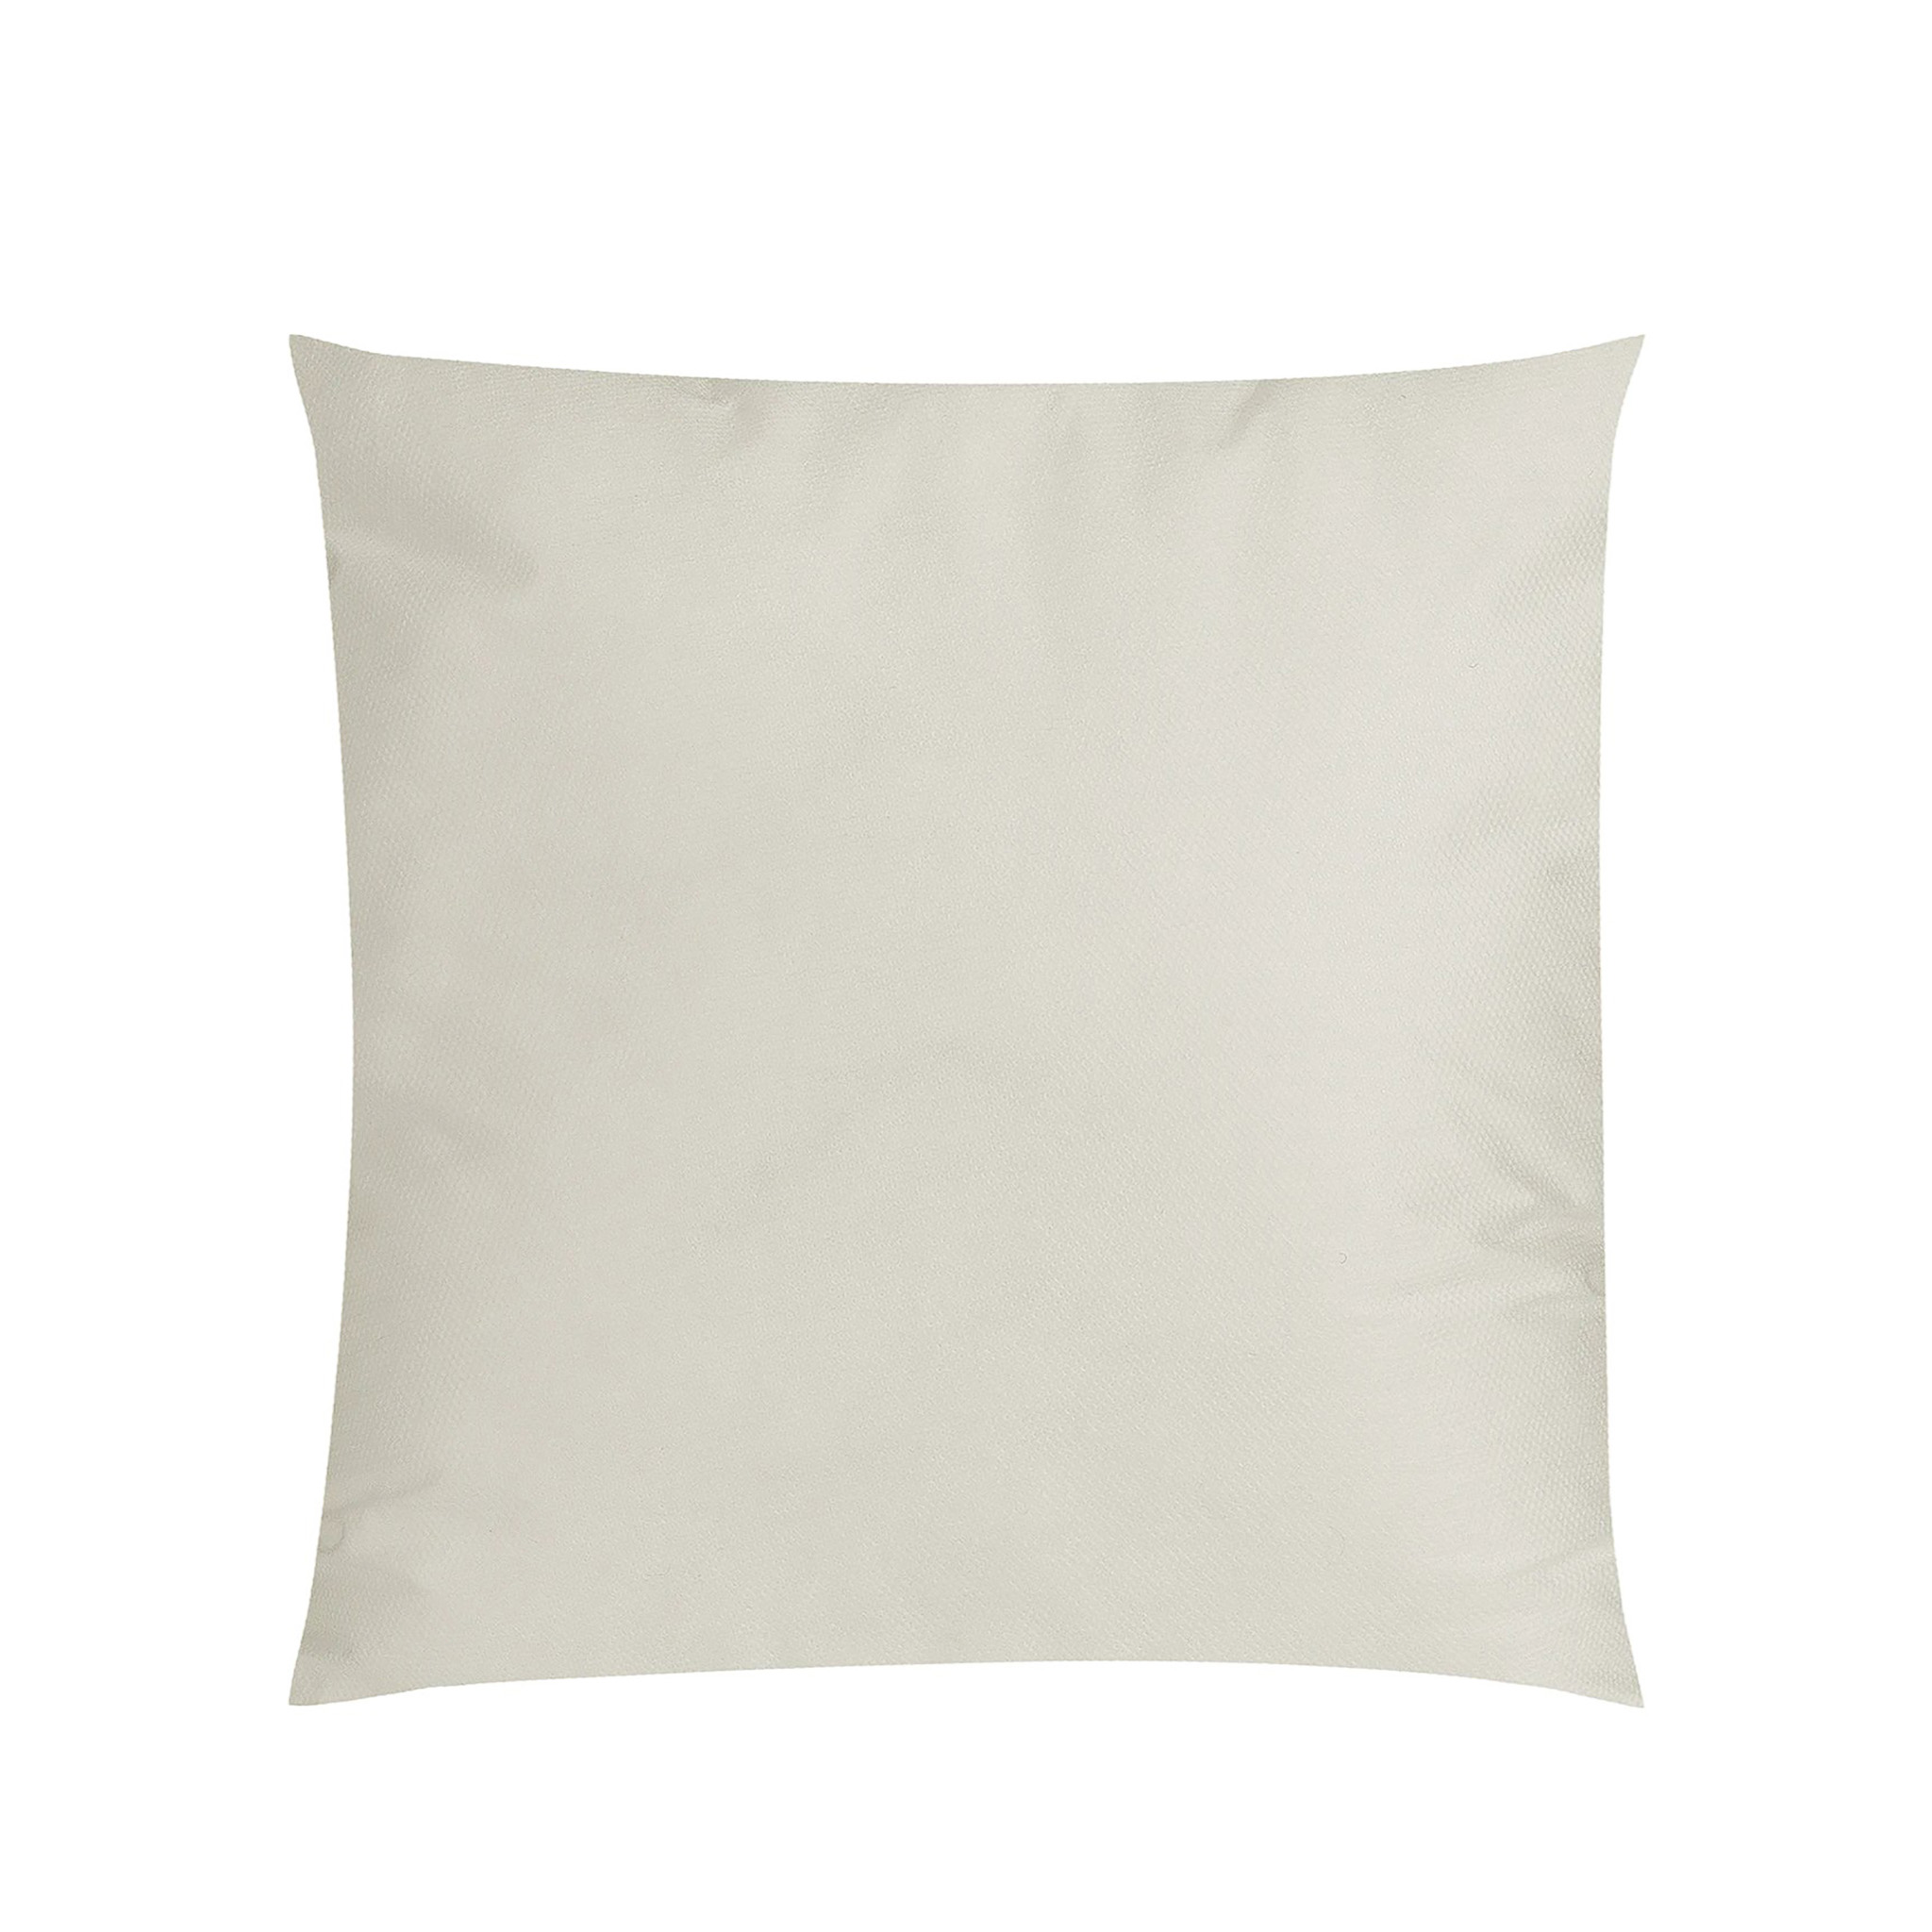 BLOMUS // FILL - CUSHION FILLING | 45 X 45 CM MADE OF 100% RECYCLED FEATHERS | WHITE